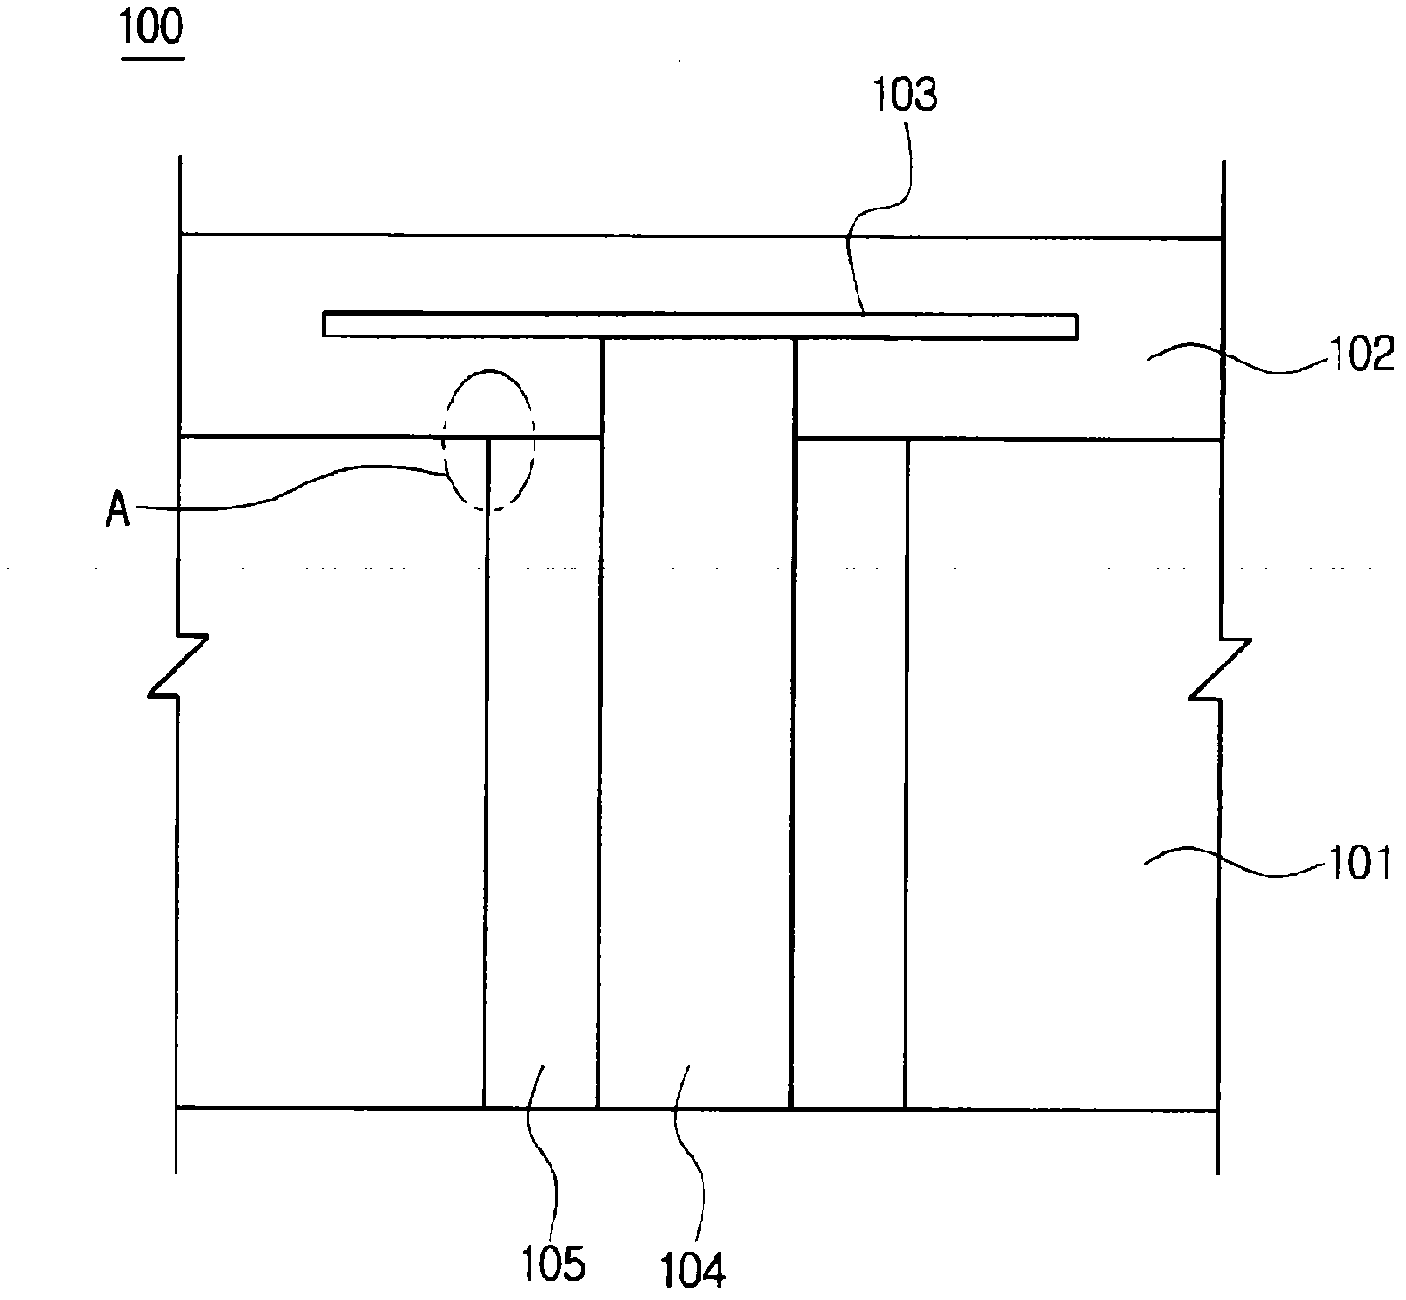 Electrostatic chuck (esc) comprising a double buffer layer (dbl) to reduce thermal stress